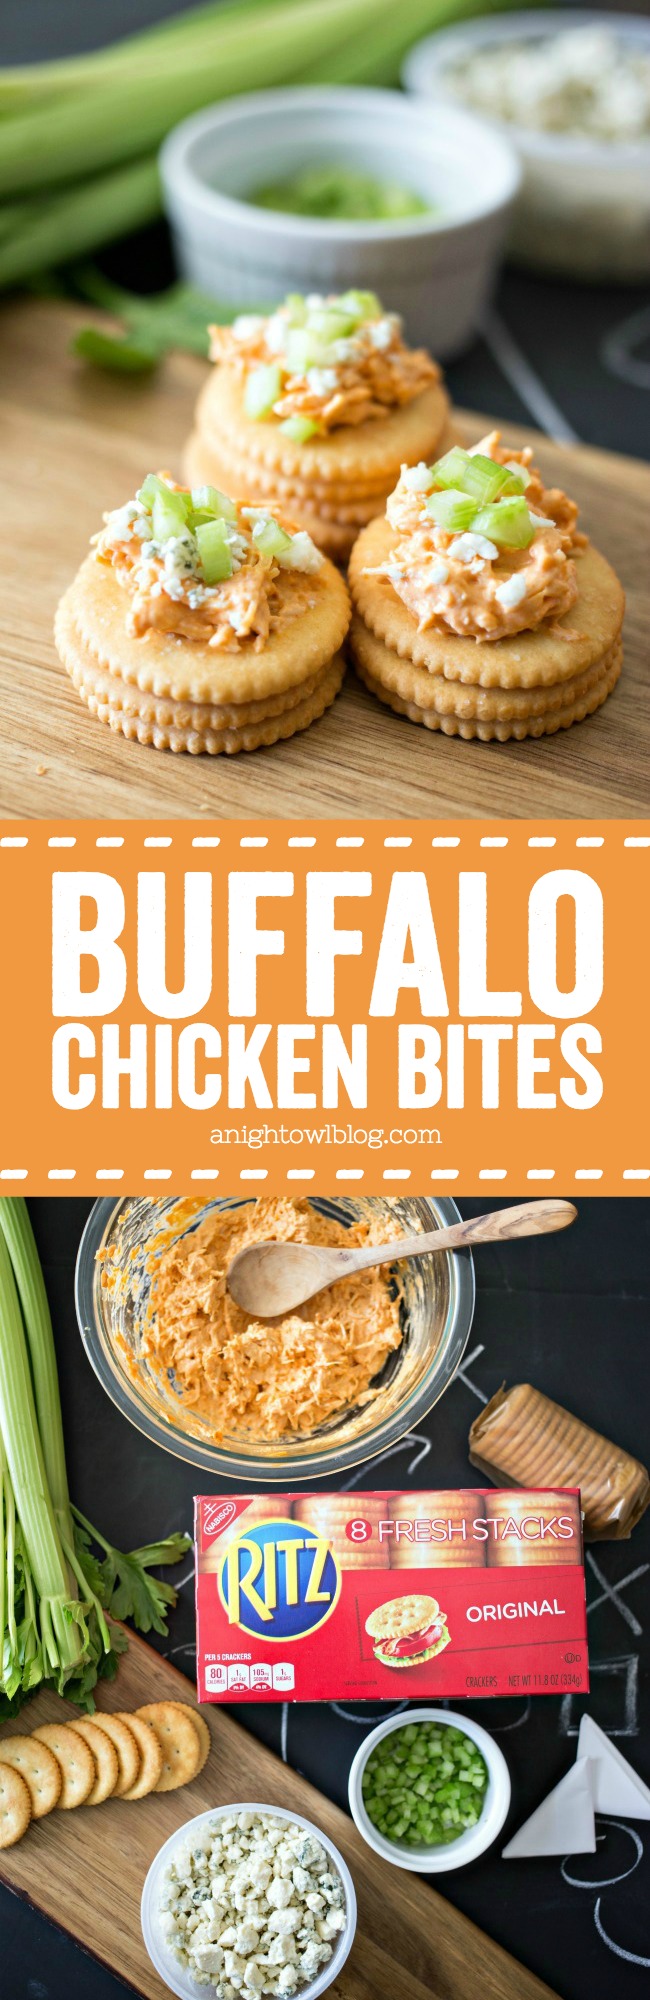 These RITZ Buffalo Chicken Bites are delicious and easy to whip up! Perfect for game day!